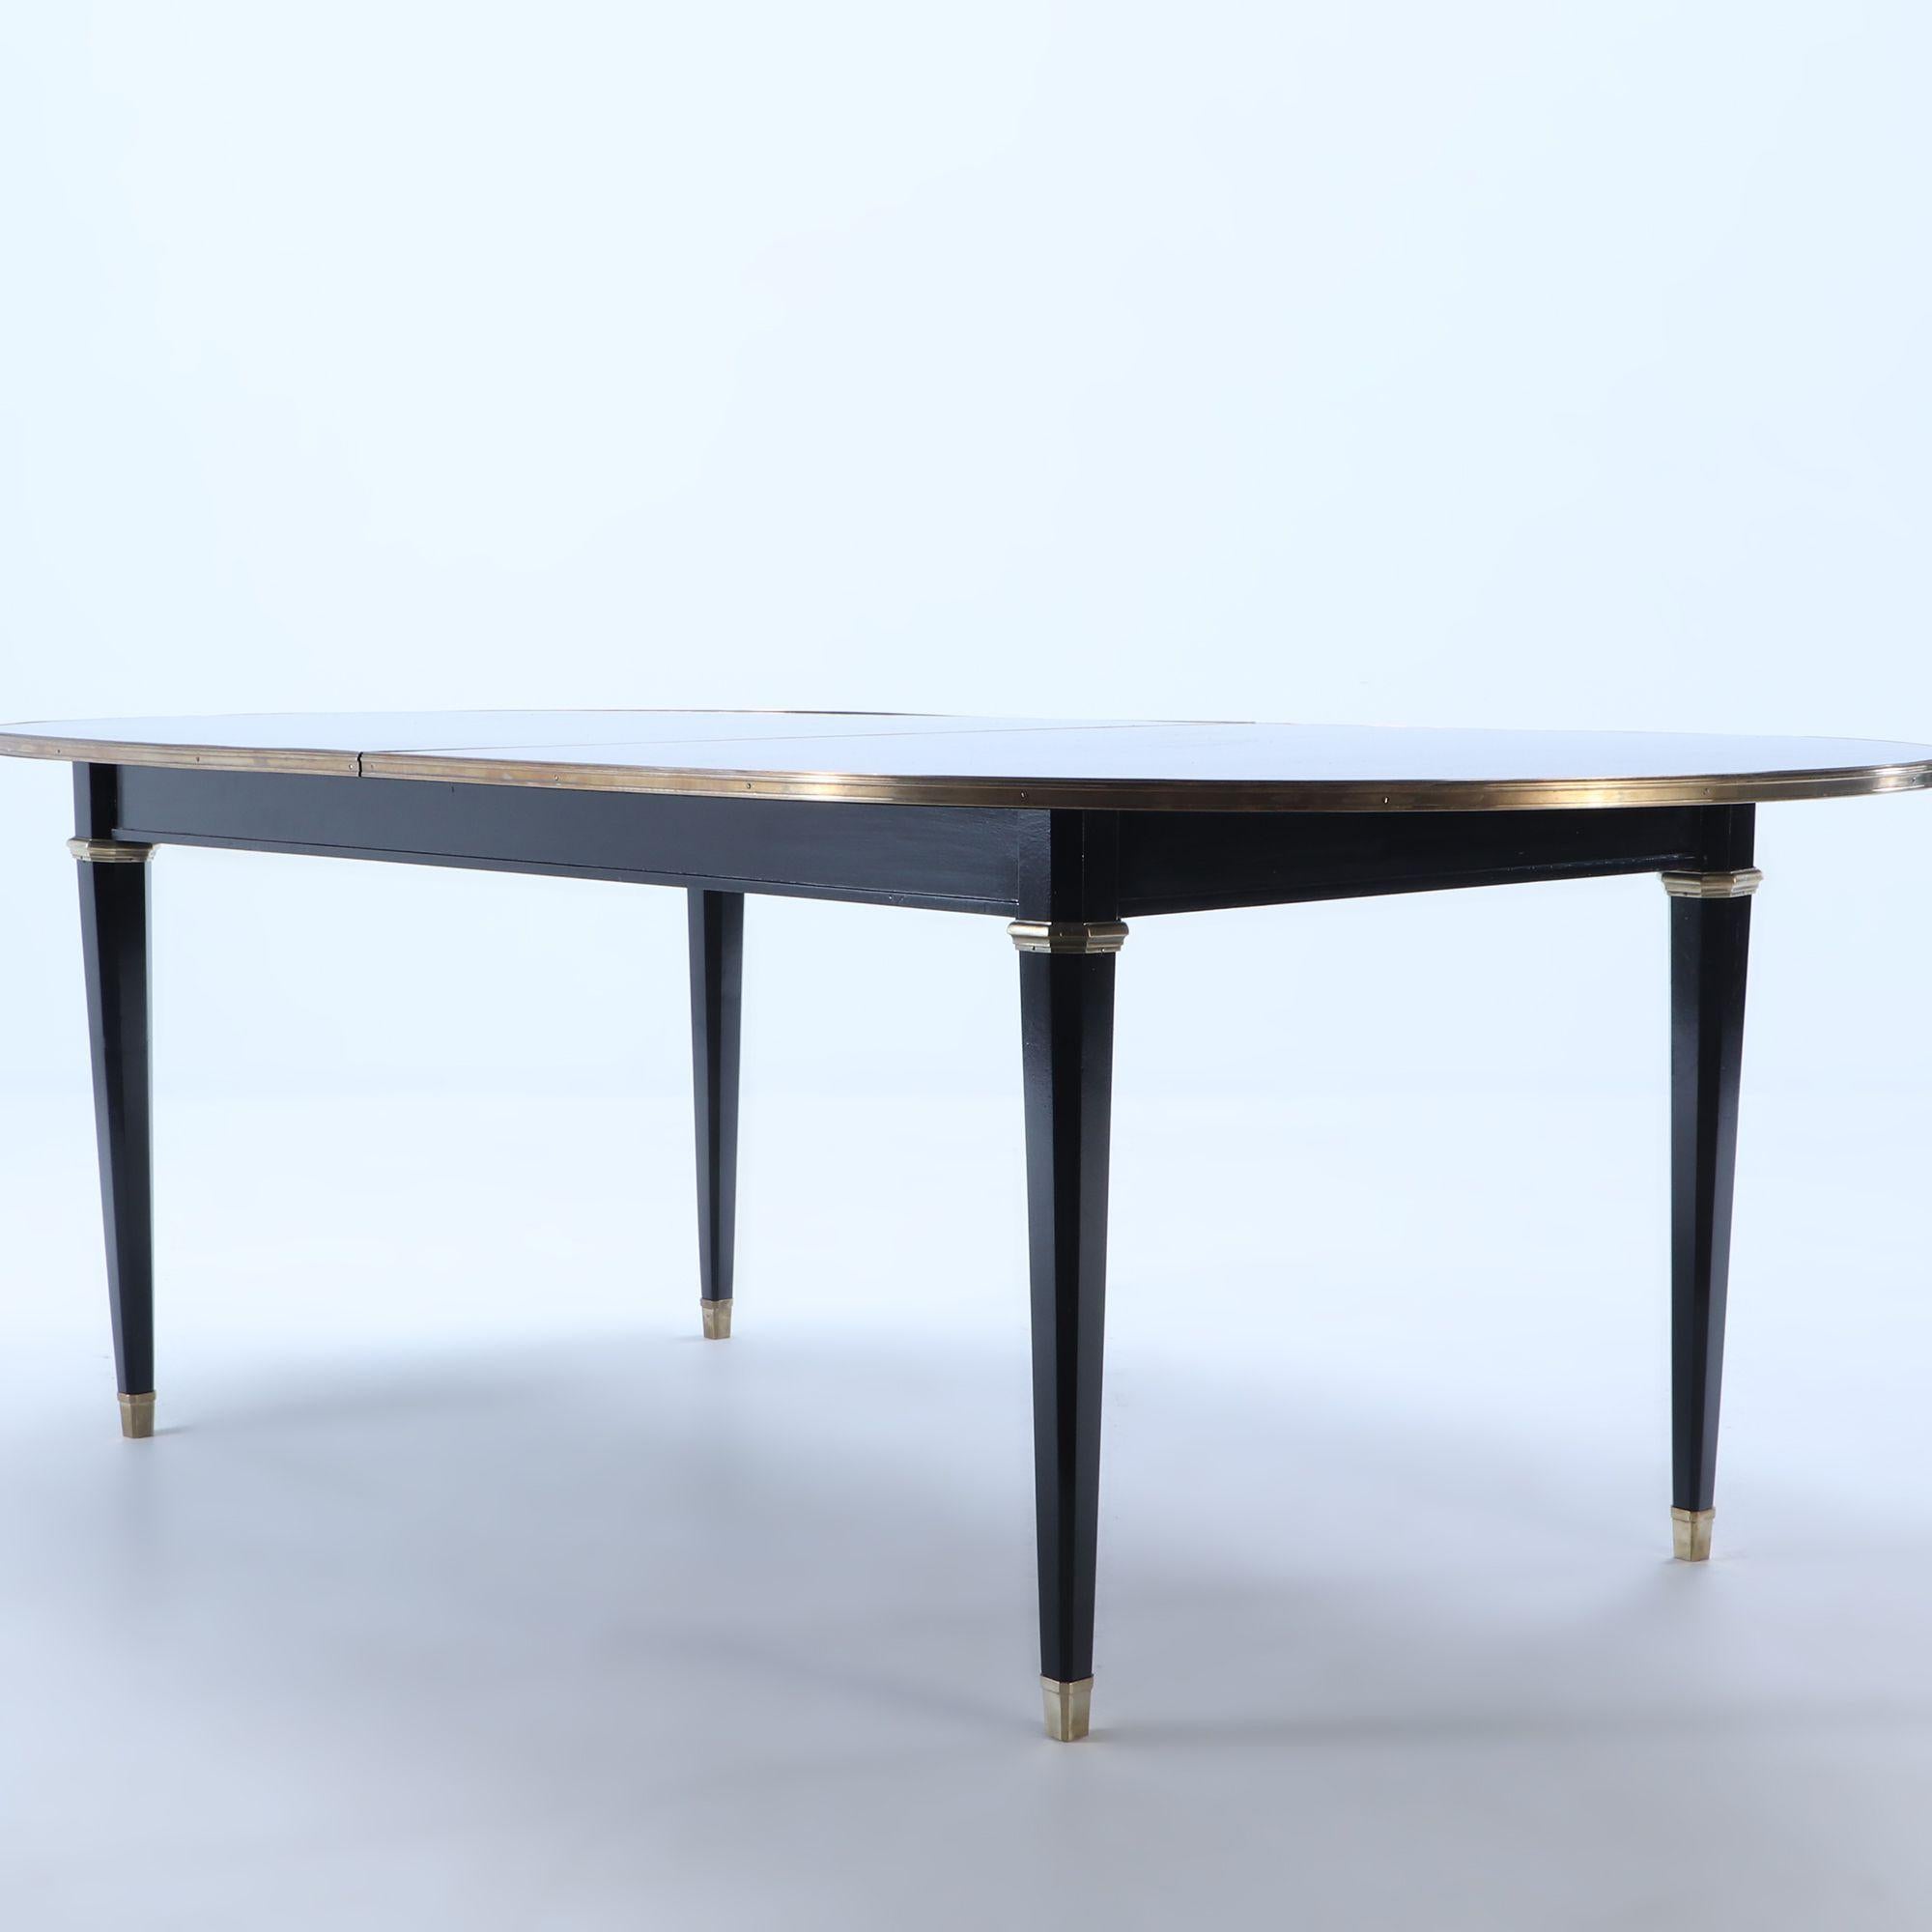 Ebonized mahogany dining room table C 1940 attributed to Maison Jansen C 1940. This table was recently discovered in Buenos Aires Argentina where the Jansen firm had a factory and office. The table has a bronze banding on the edge of the top and